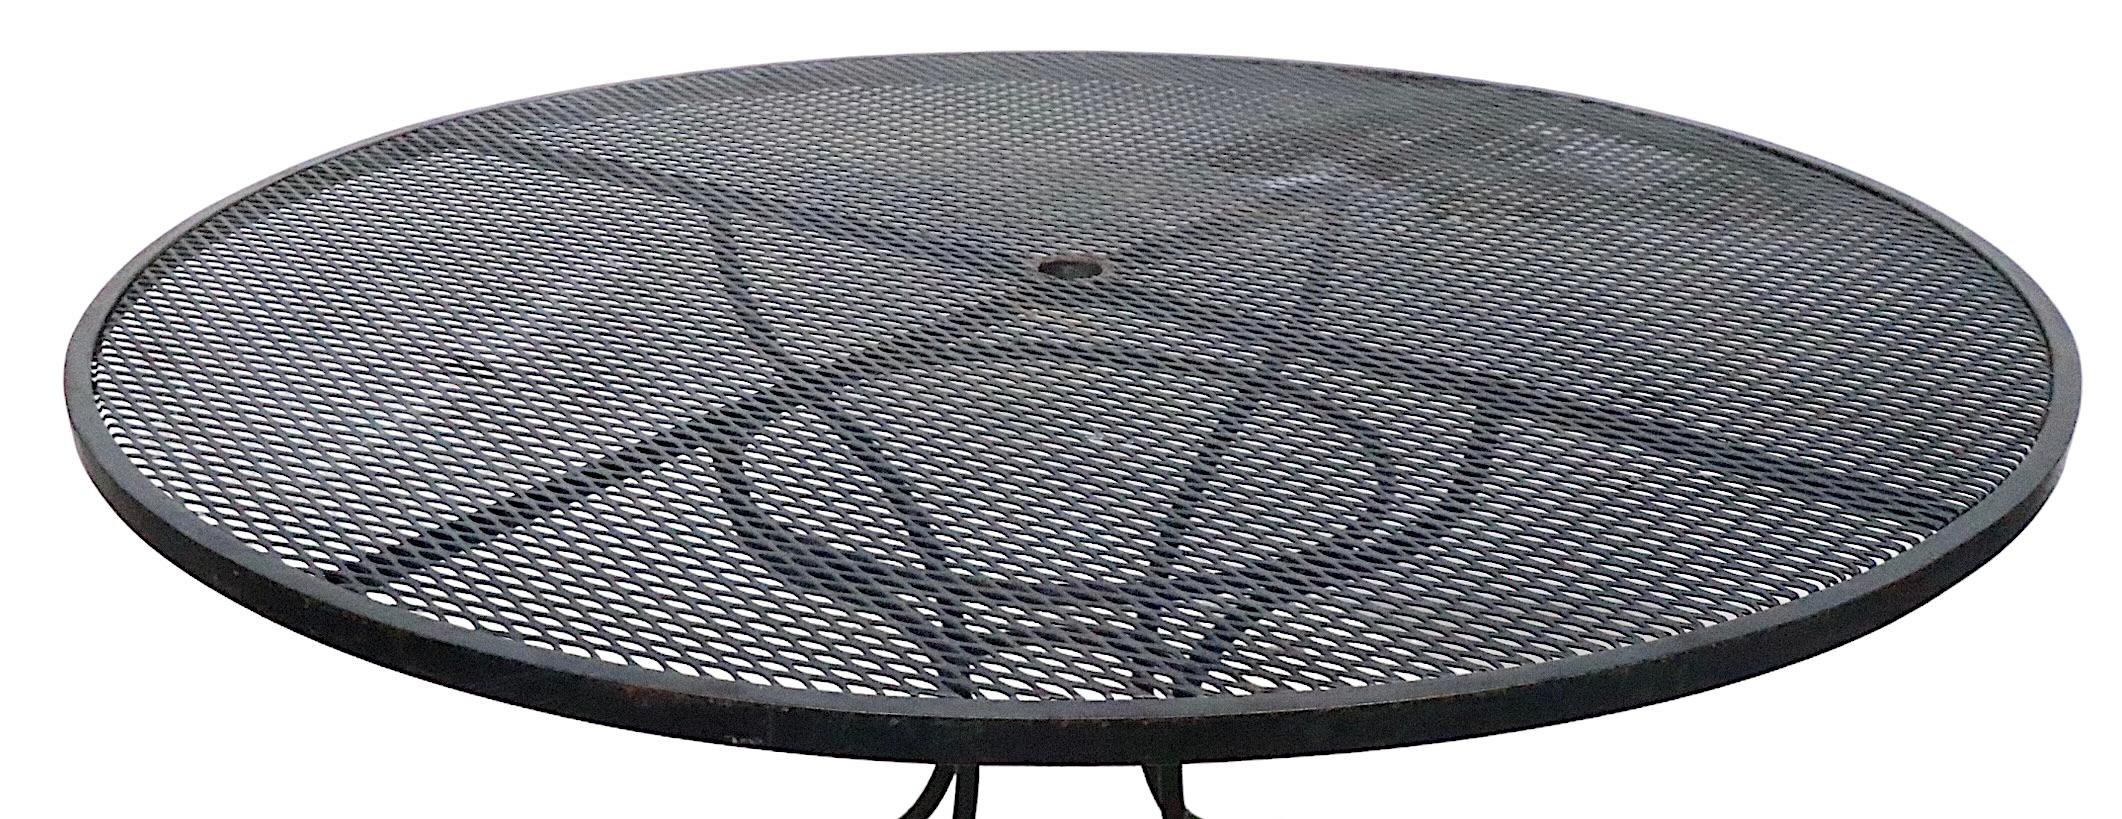 Wrought Iron Garden Patio Dining Table Taj Mahal by Salterini circa 1950/60s In Good Condition For Sale In New York, NY